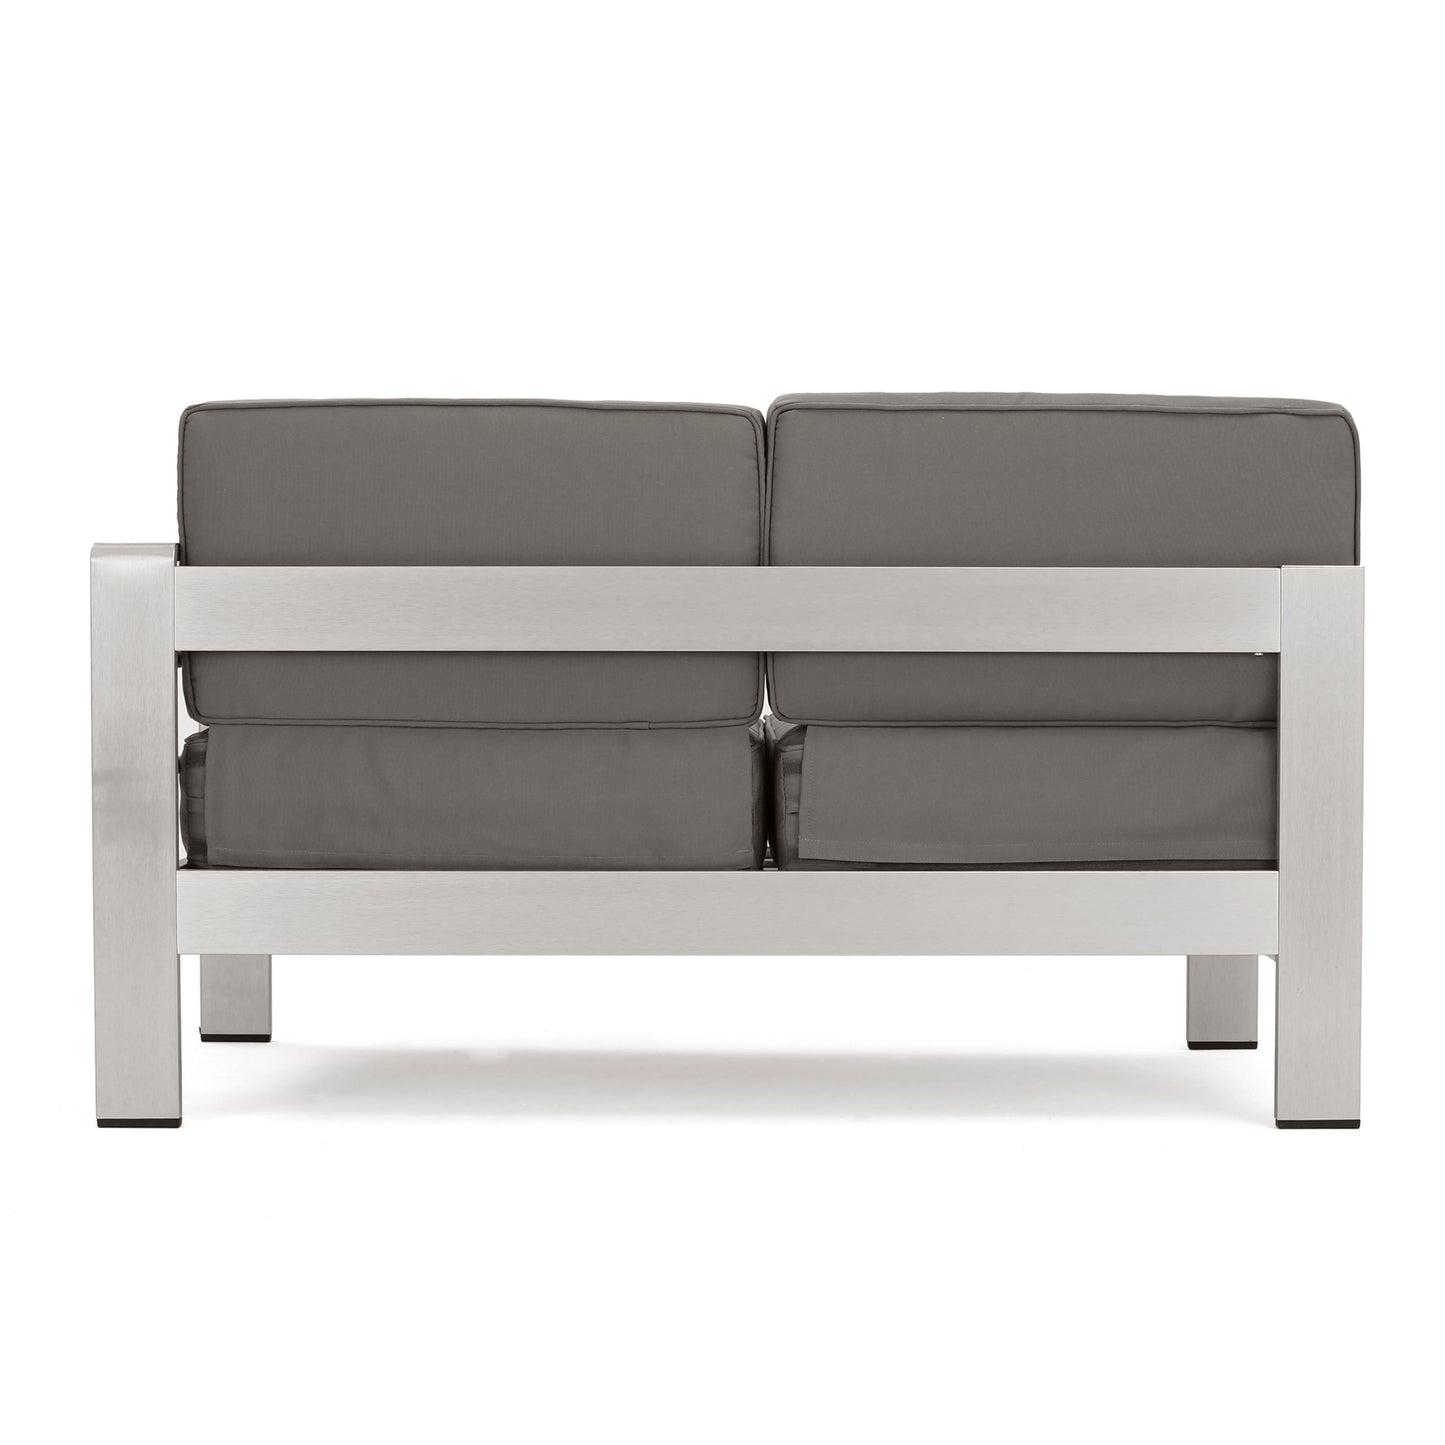 Emily Coral Outdoor 7-Seater Aluminum Sectional Sofa Set, Silver and Khaki